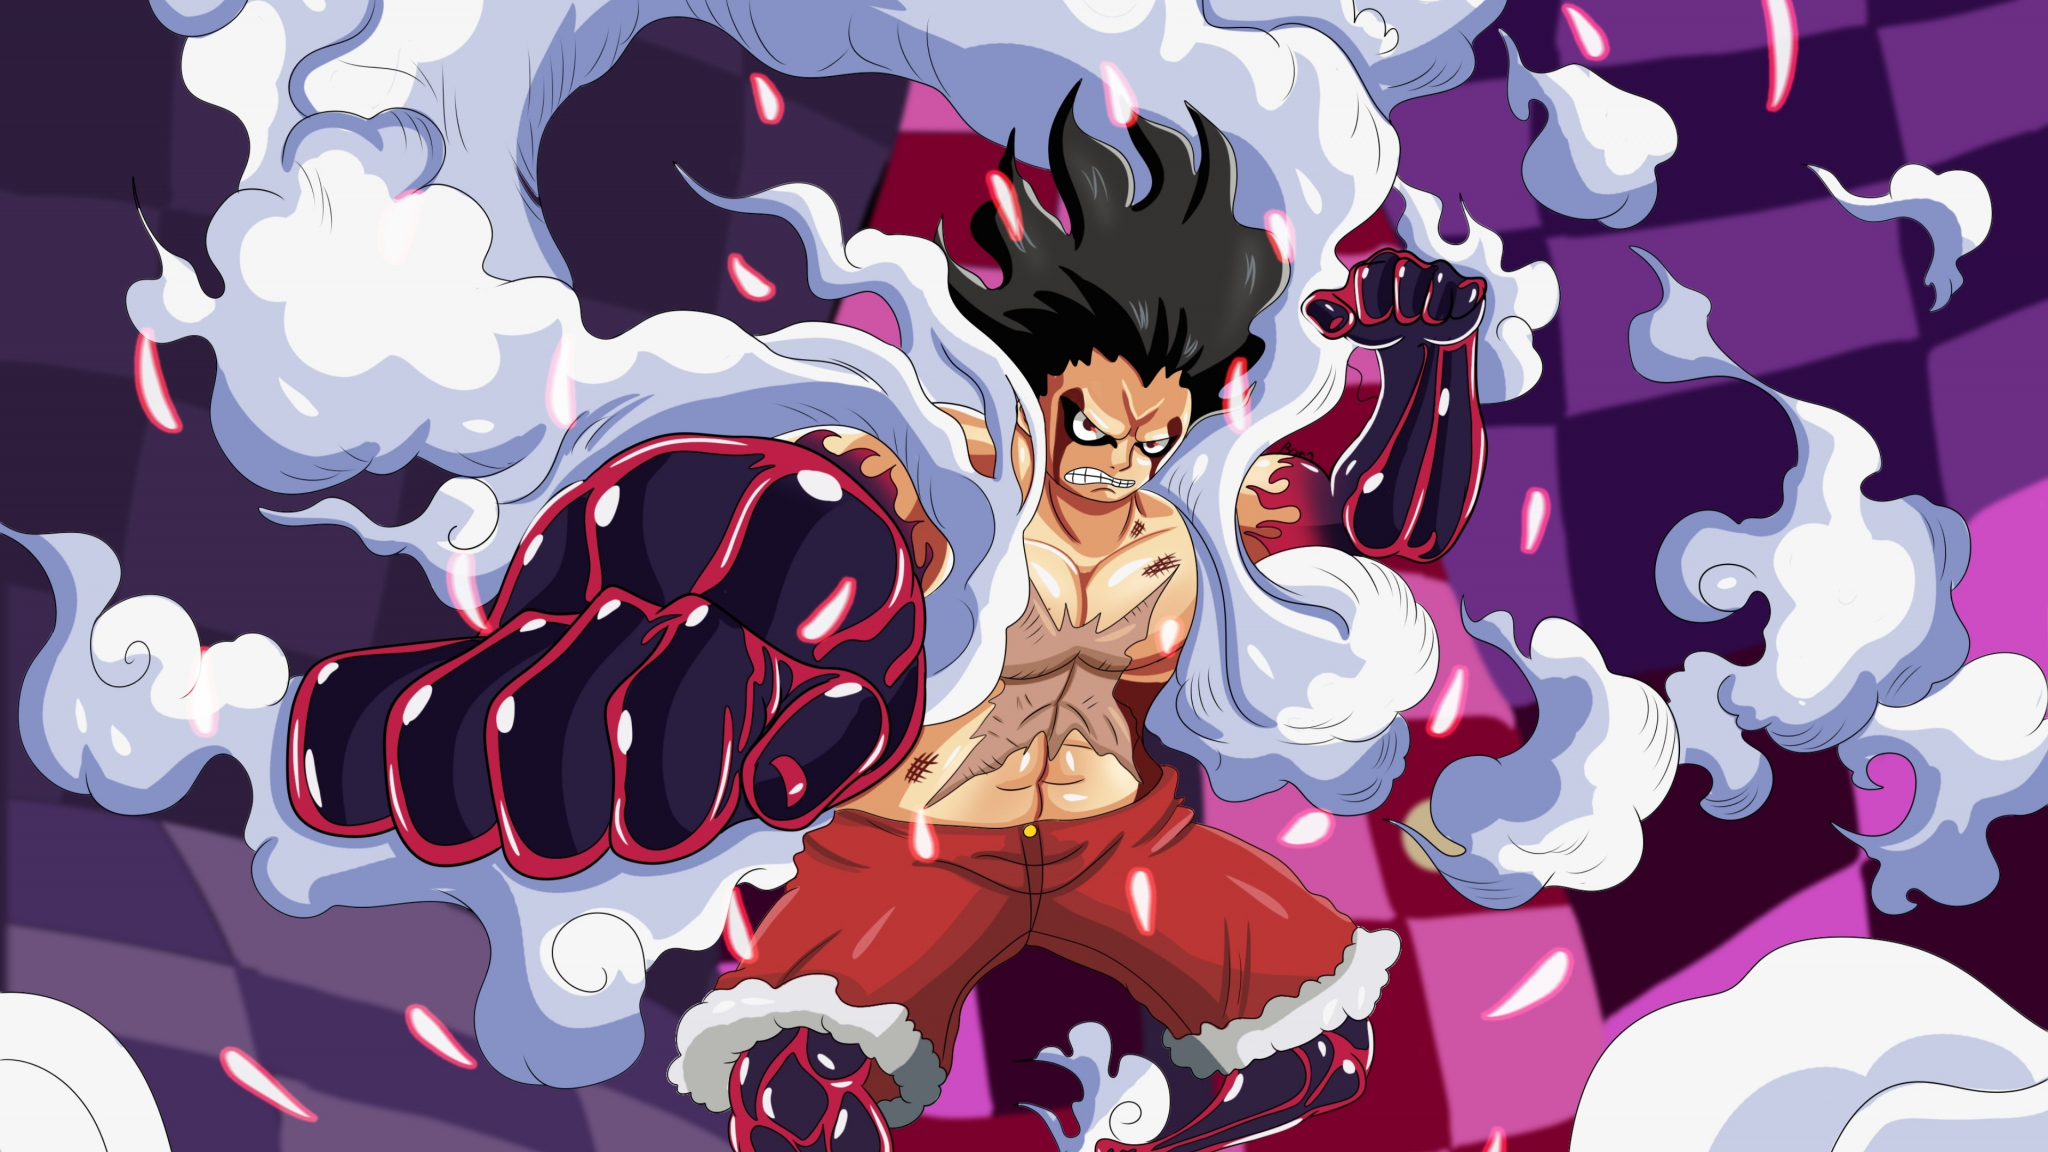 Download artwork, one piece, monkey d. luffy 2048x1152 wallpaper, dual wide 2048x1152 HD image, background, 10090